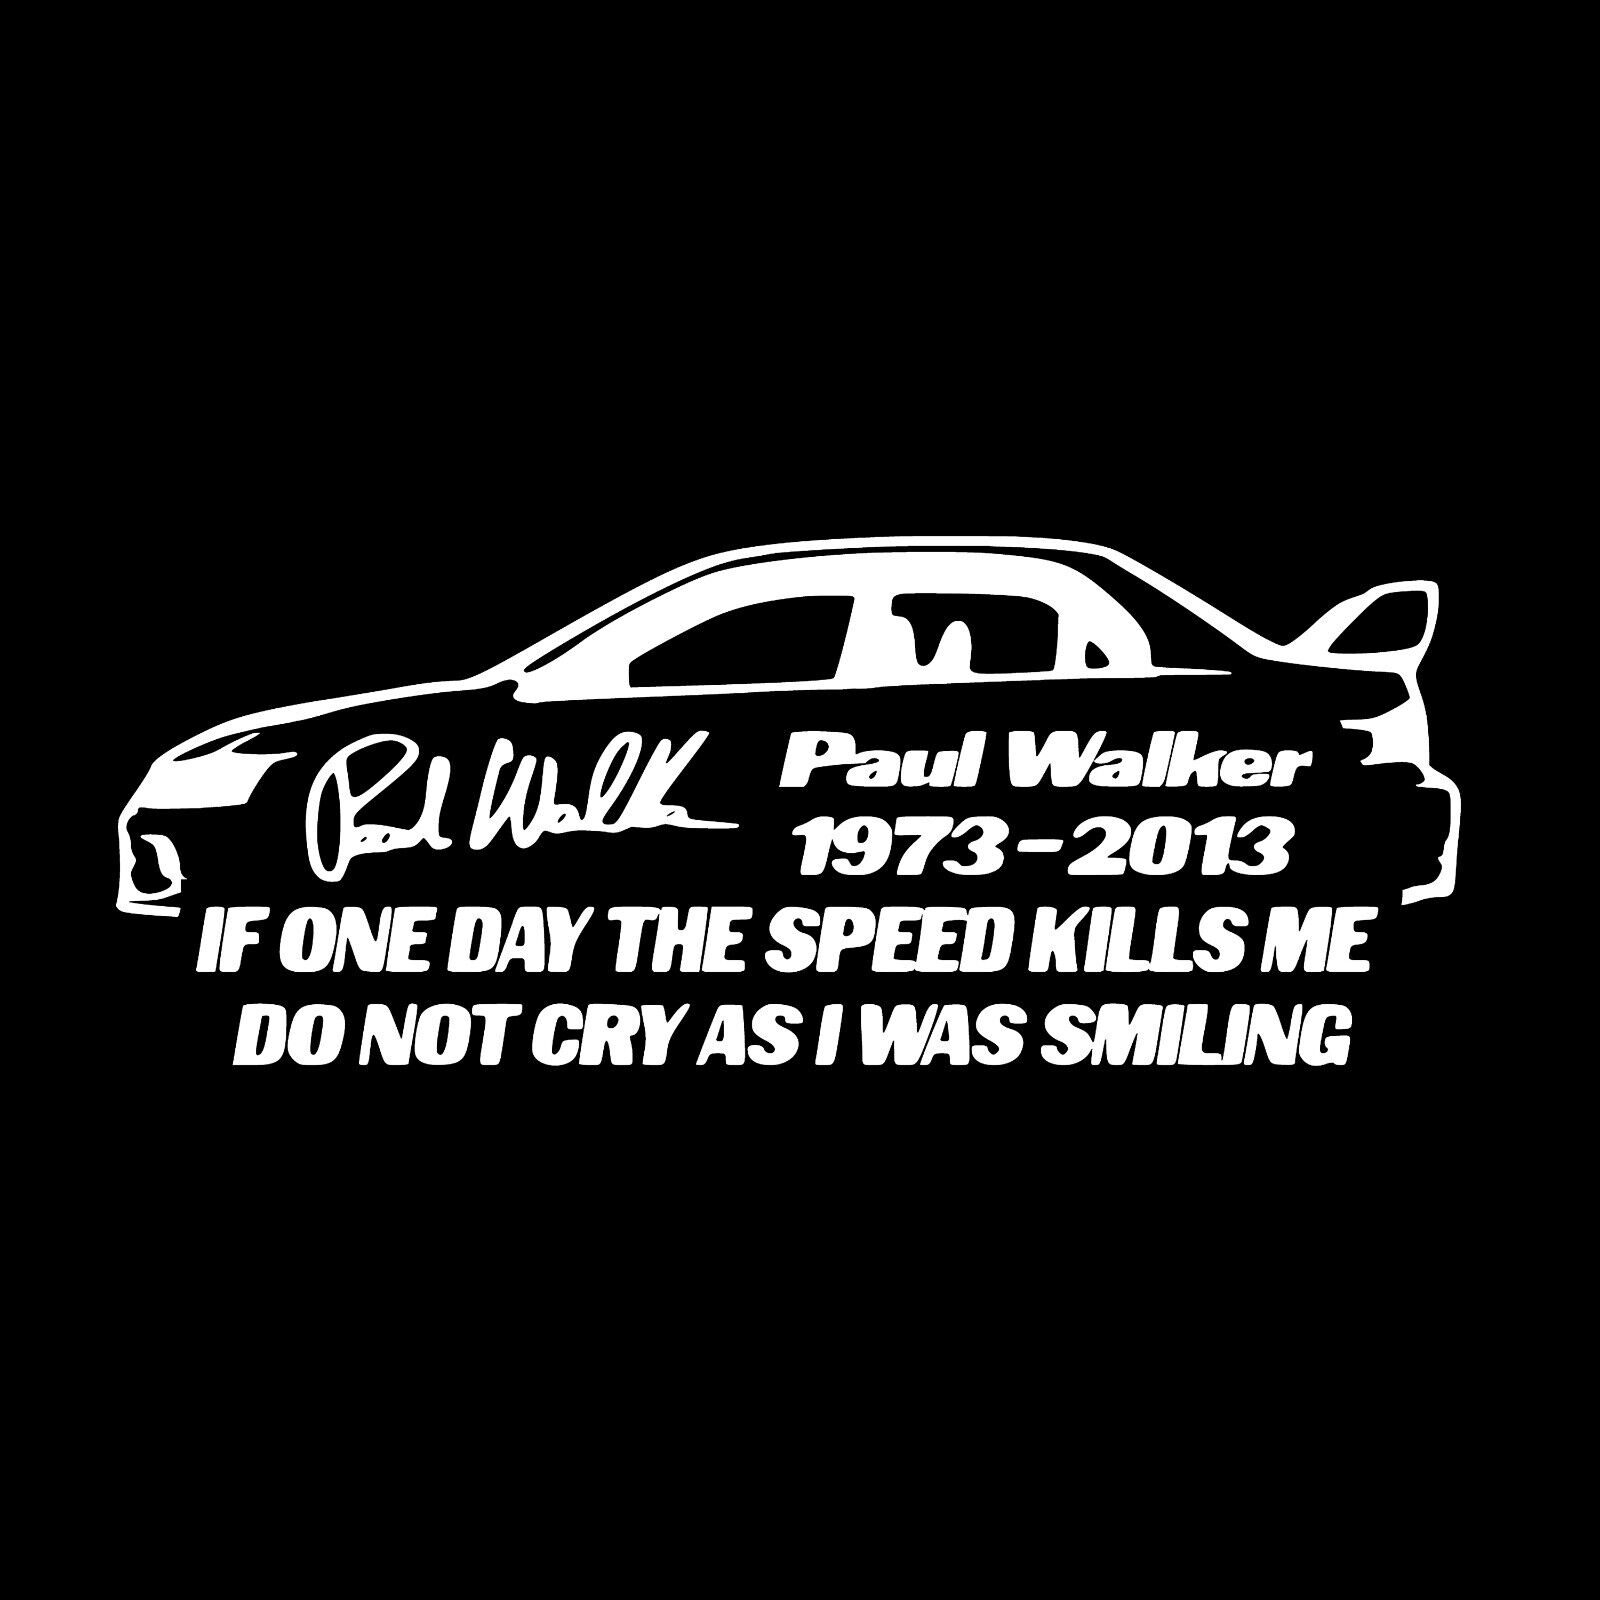 Paul Walker Evo Tribute Sticker - Custom Memorial Decal - Select Color And Size